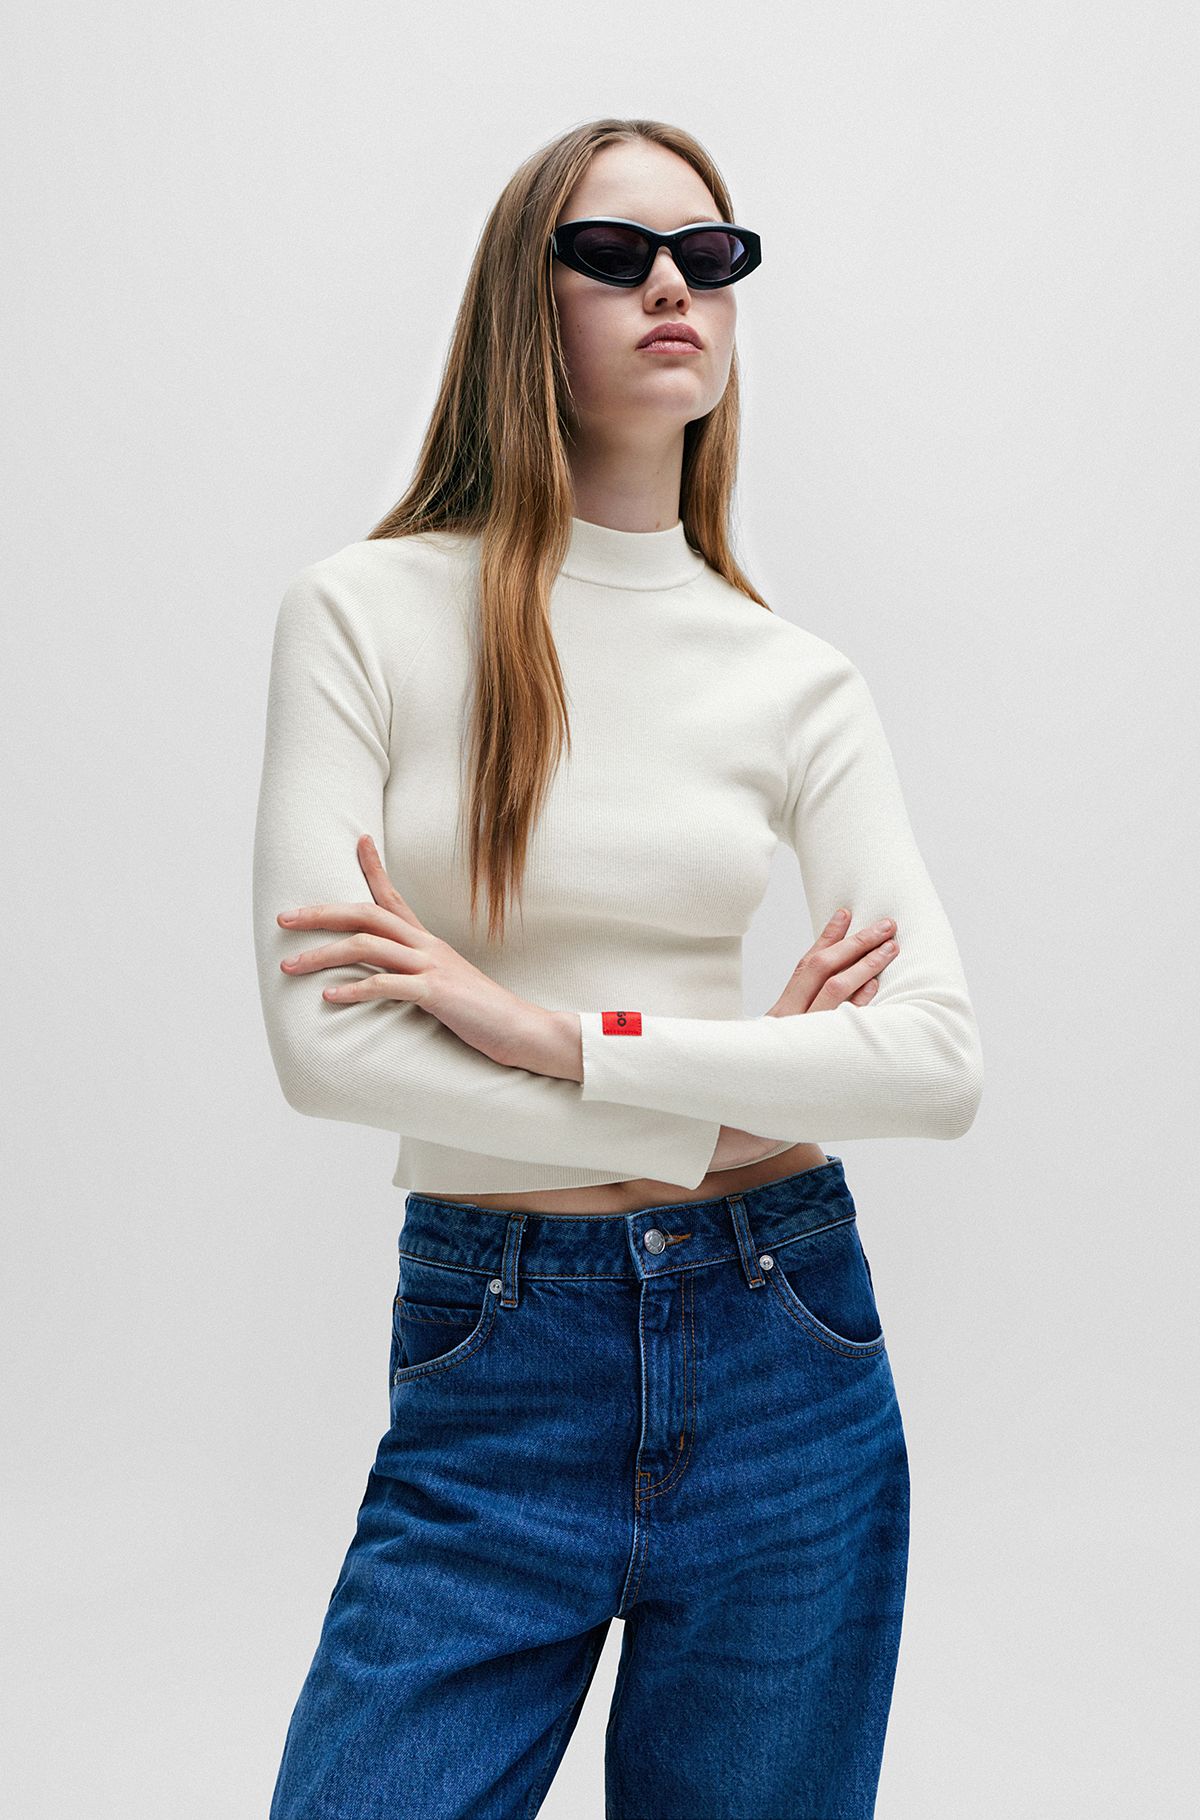 Rib-knit sweater with mock neckline and logo label, White